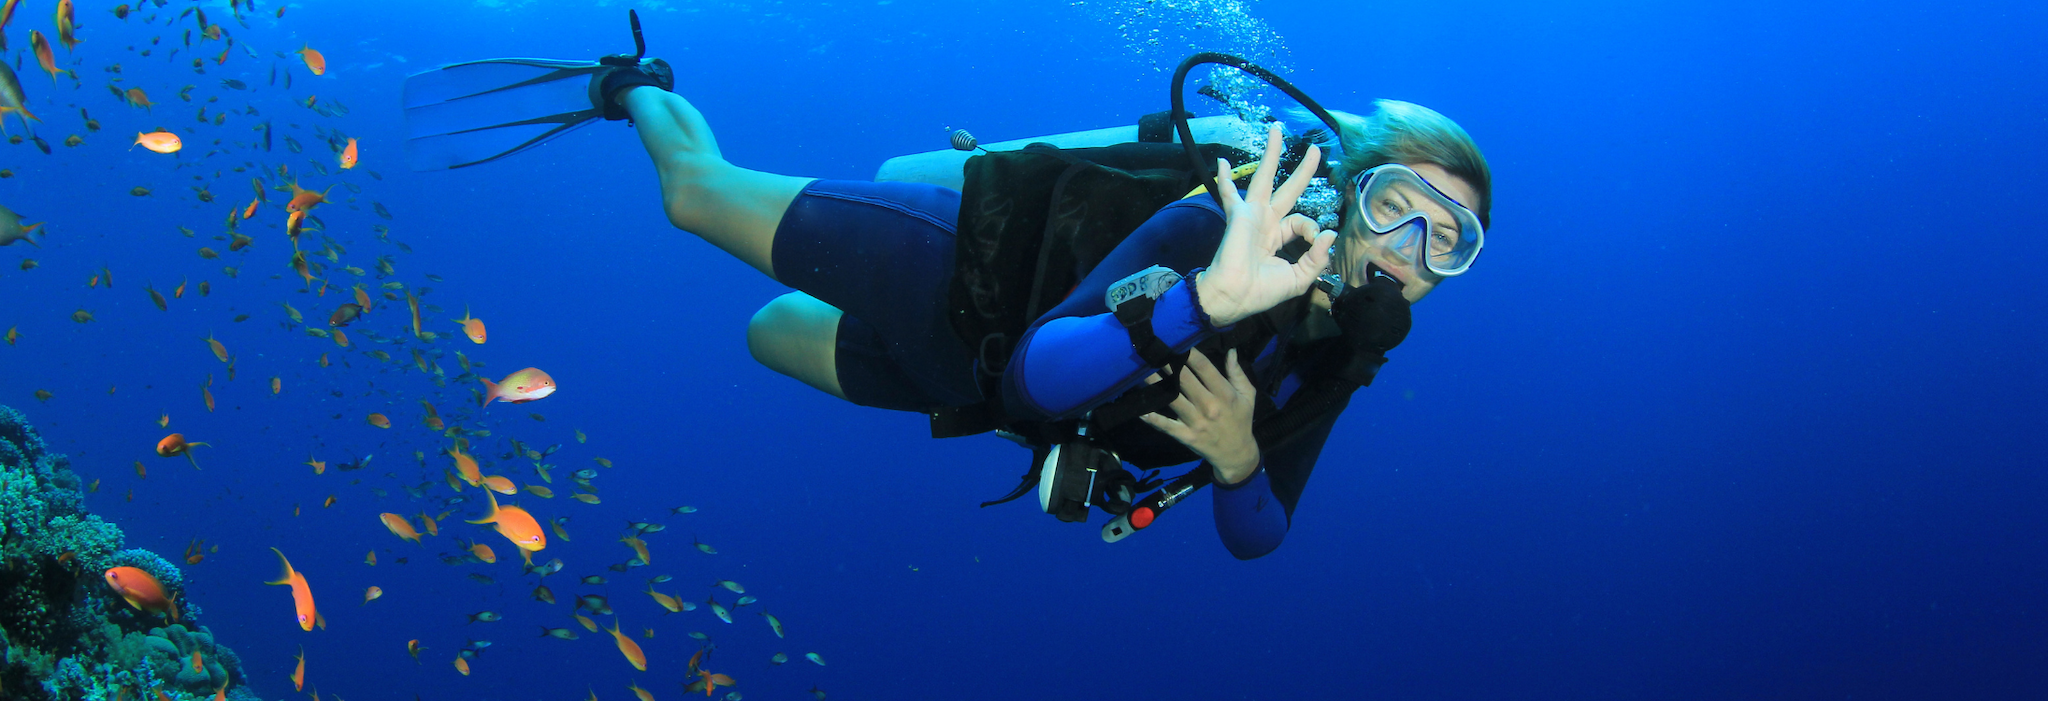 Try scuba diving or snorkeling, if you haven’t already